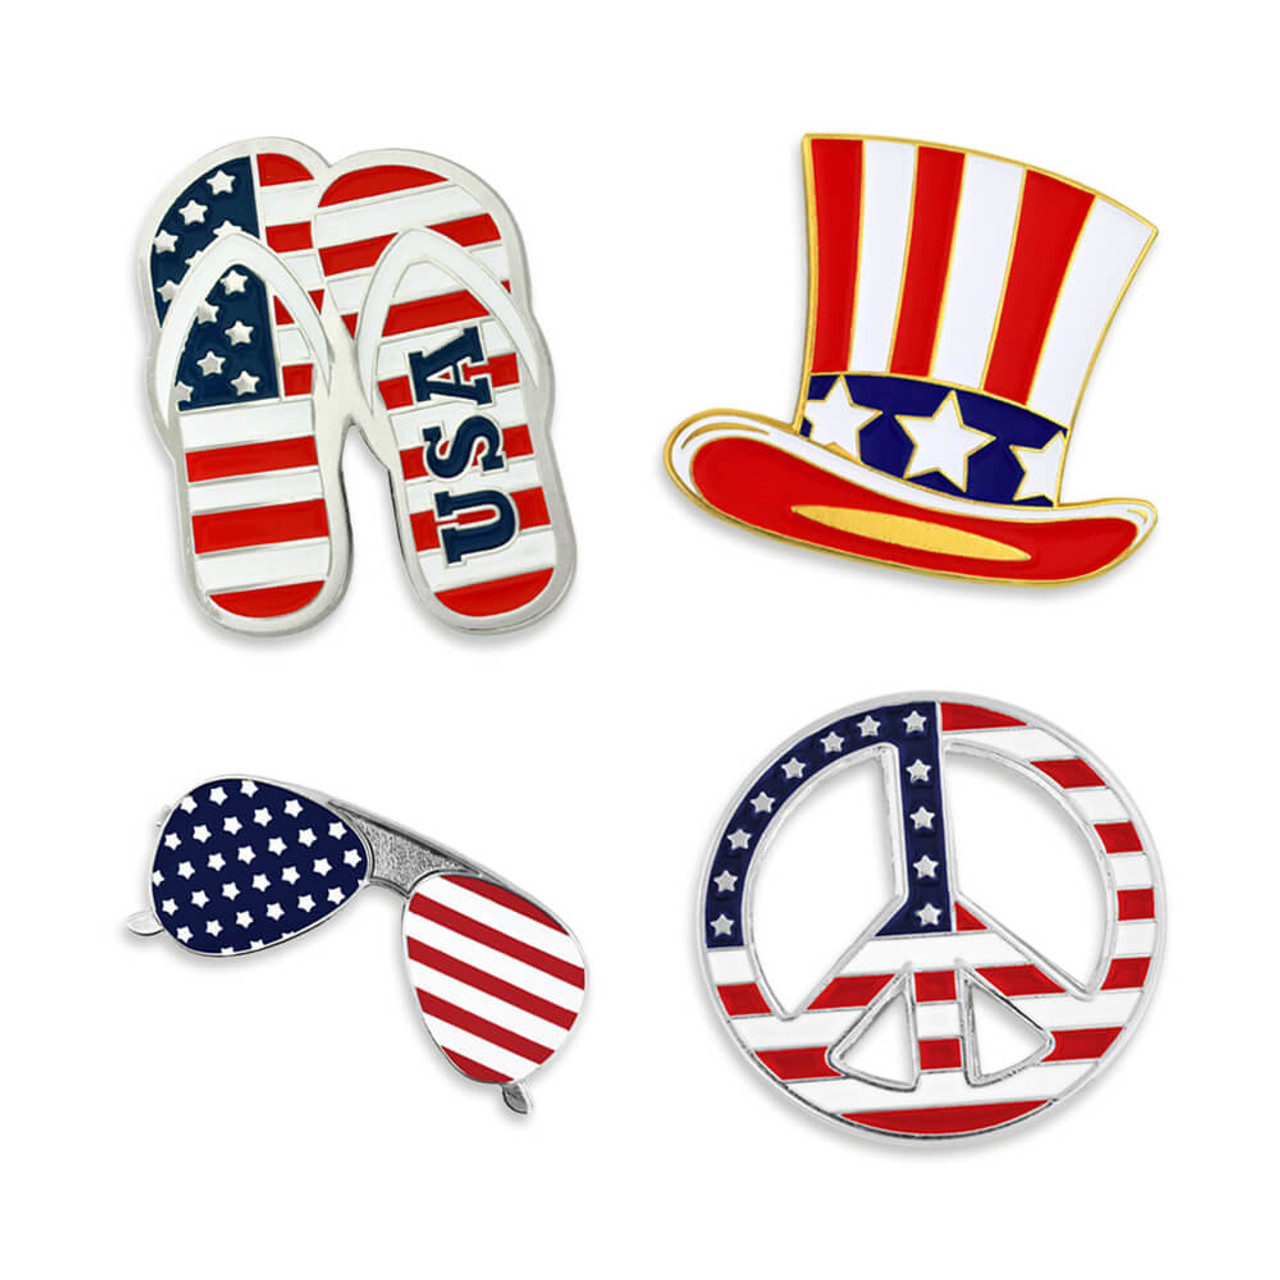 Red, White & Blue Ribbon Pin | Red/White/Blue | Patriotic Pins by PinMart